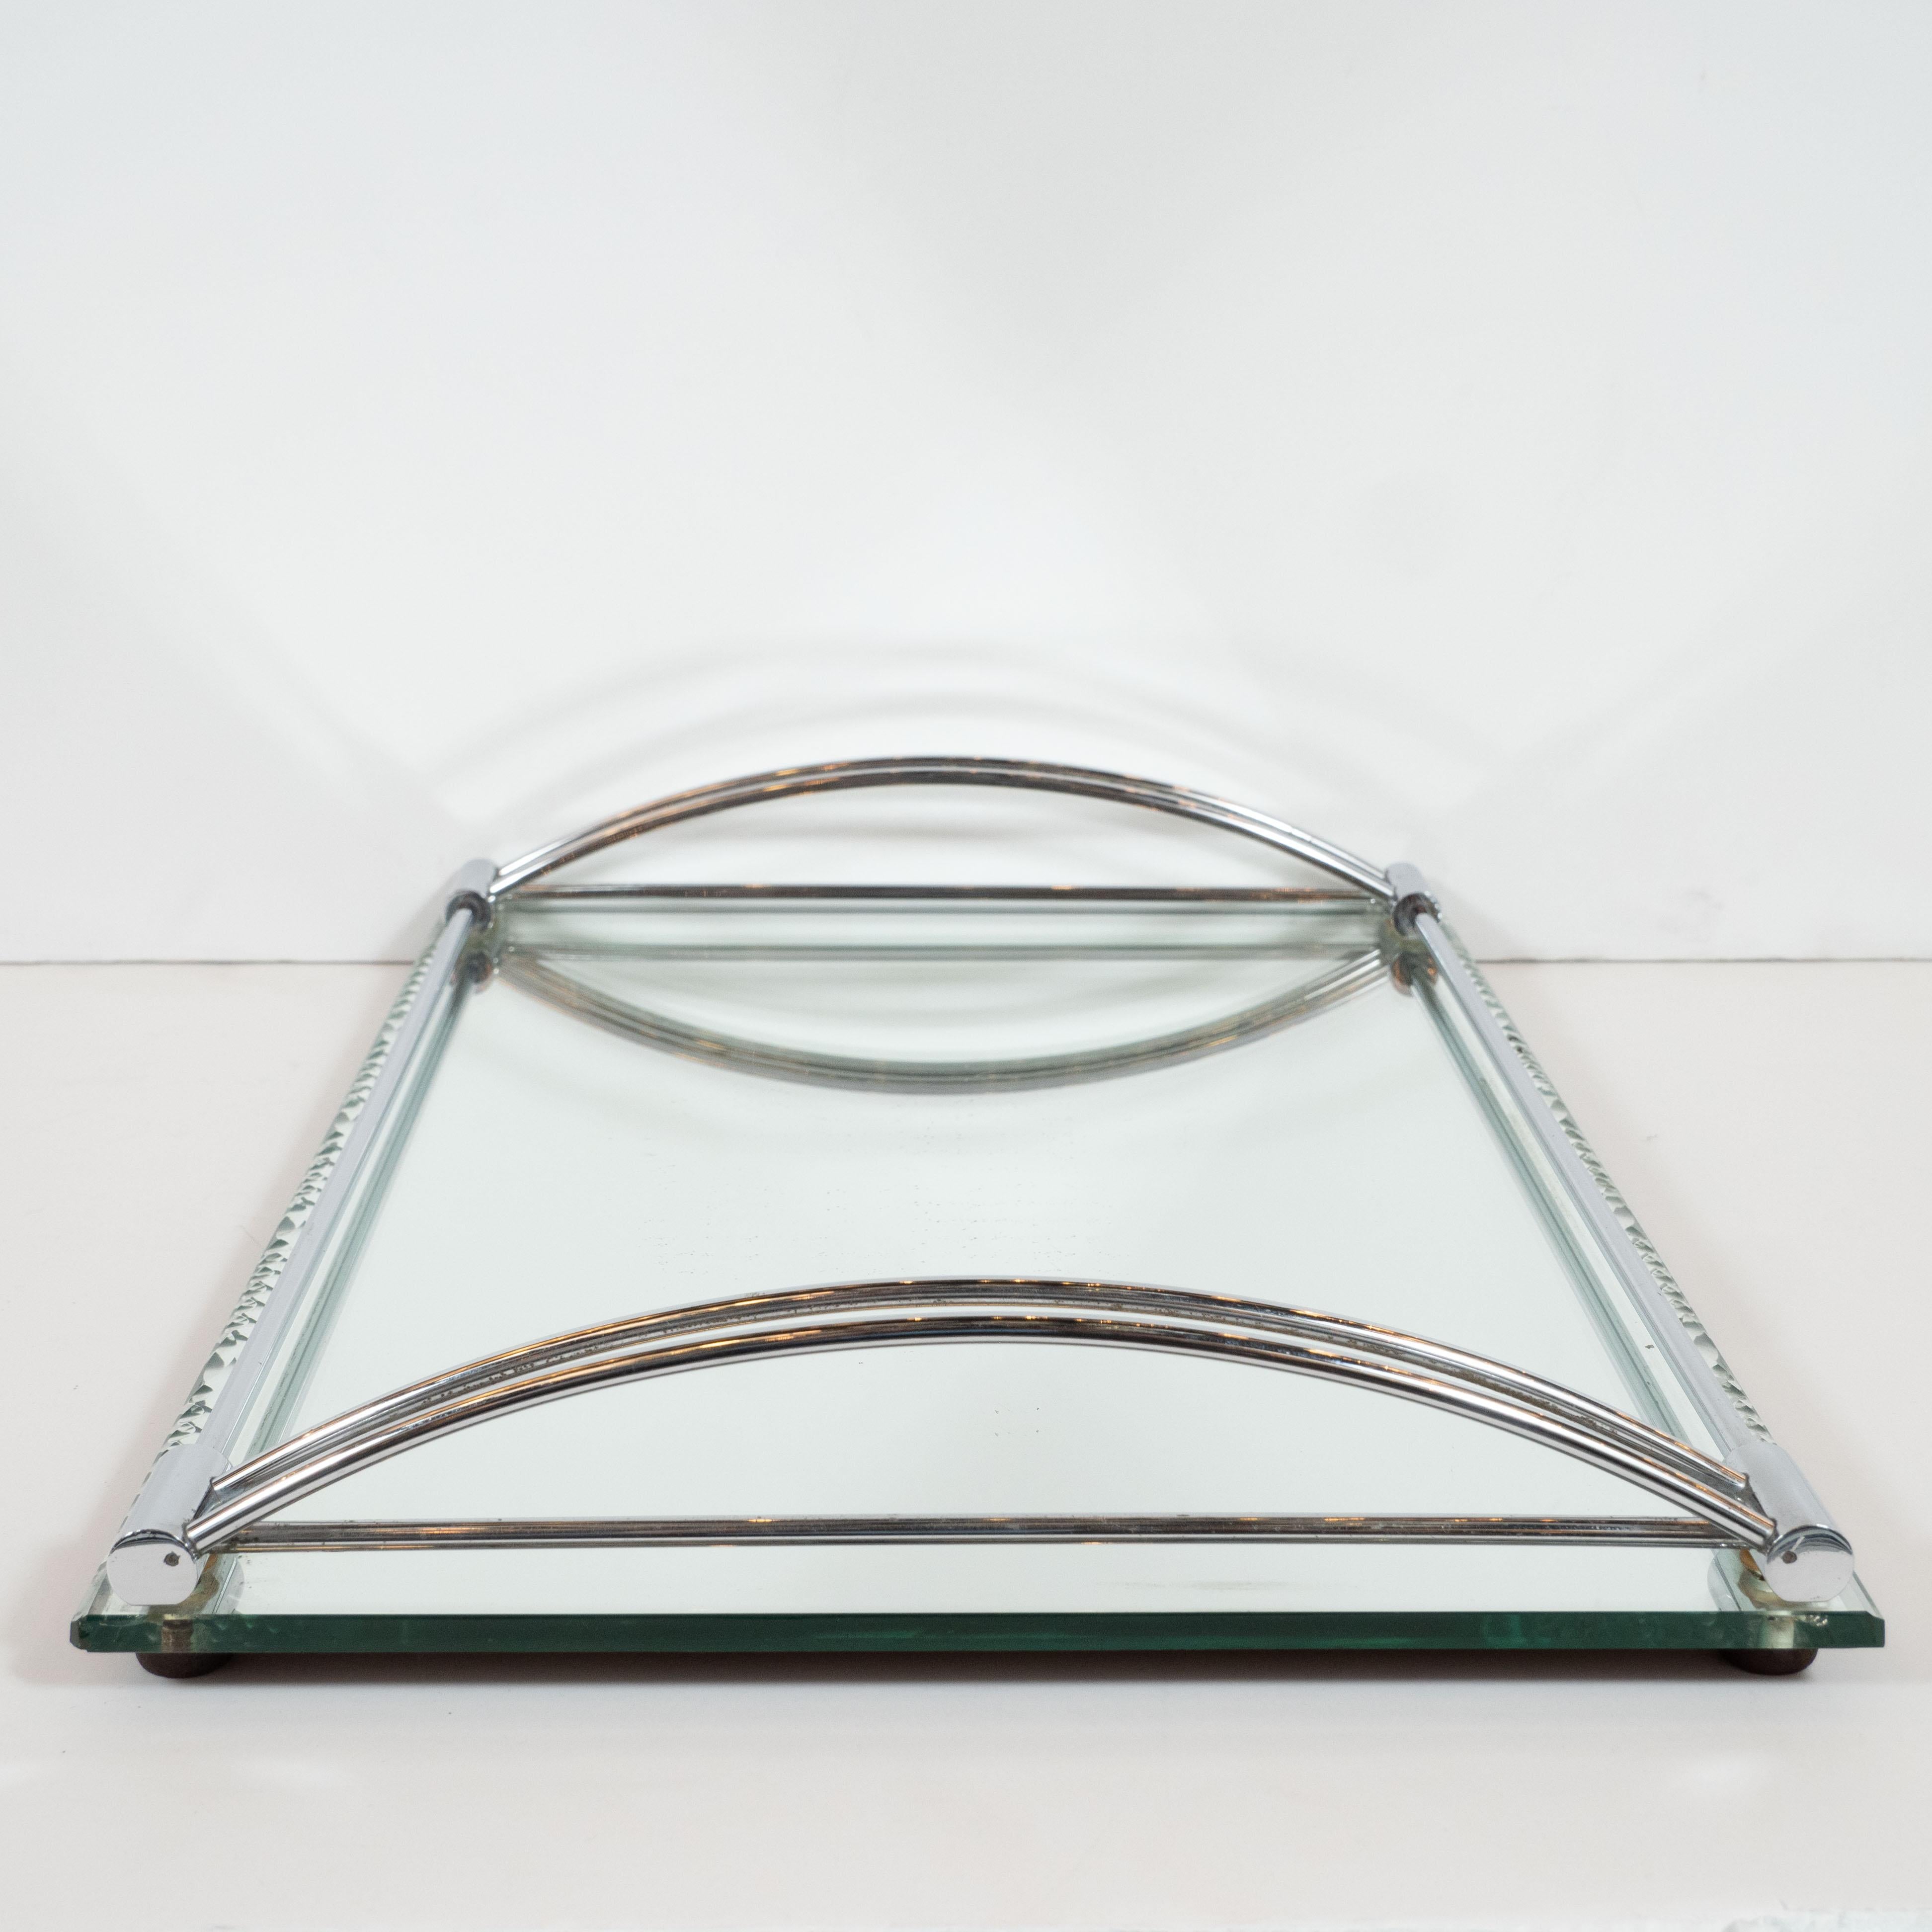 Mid-20th Century French Art Deco Streamlined Chrome and Chain Beveled Mirror Bar Tray